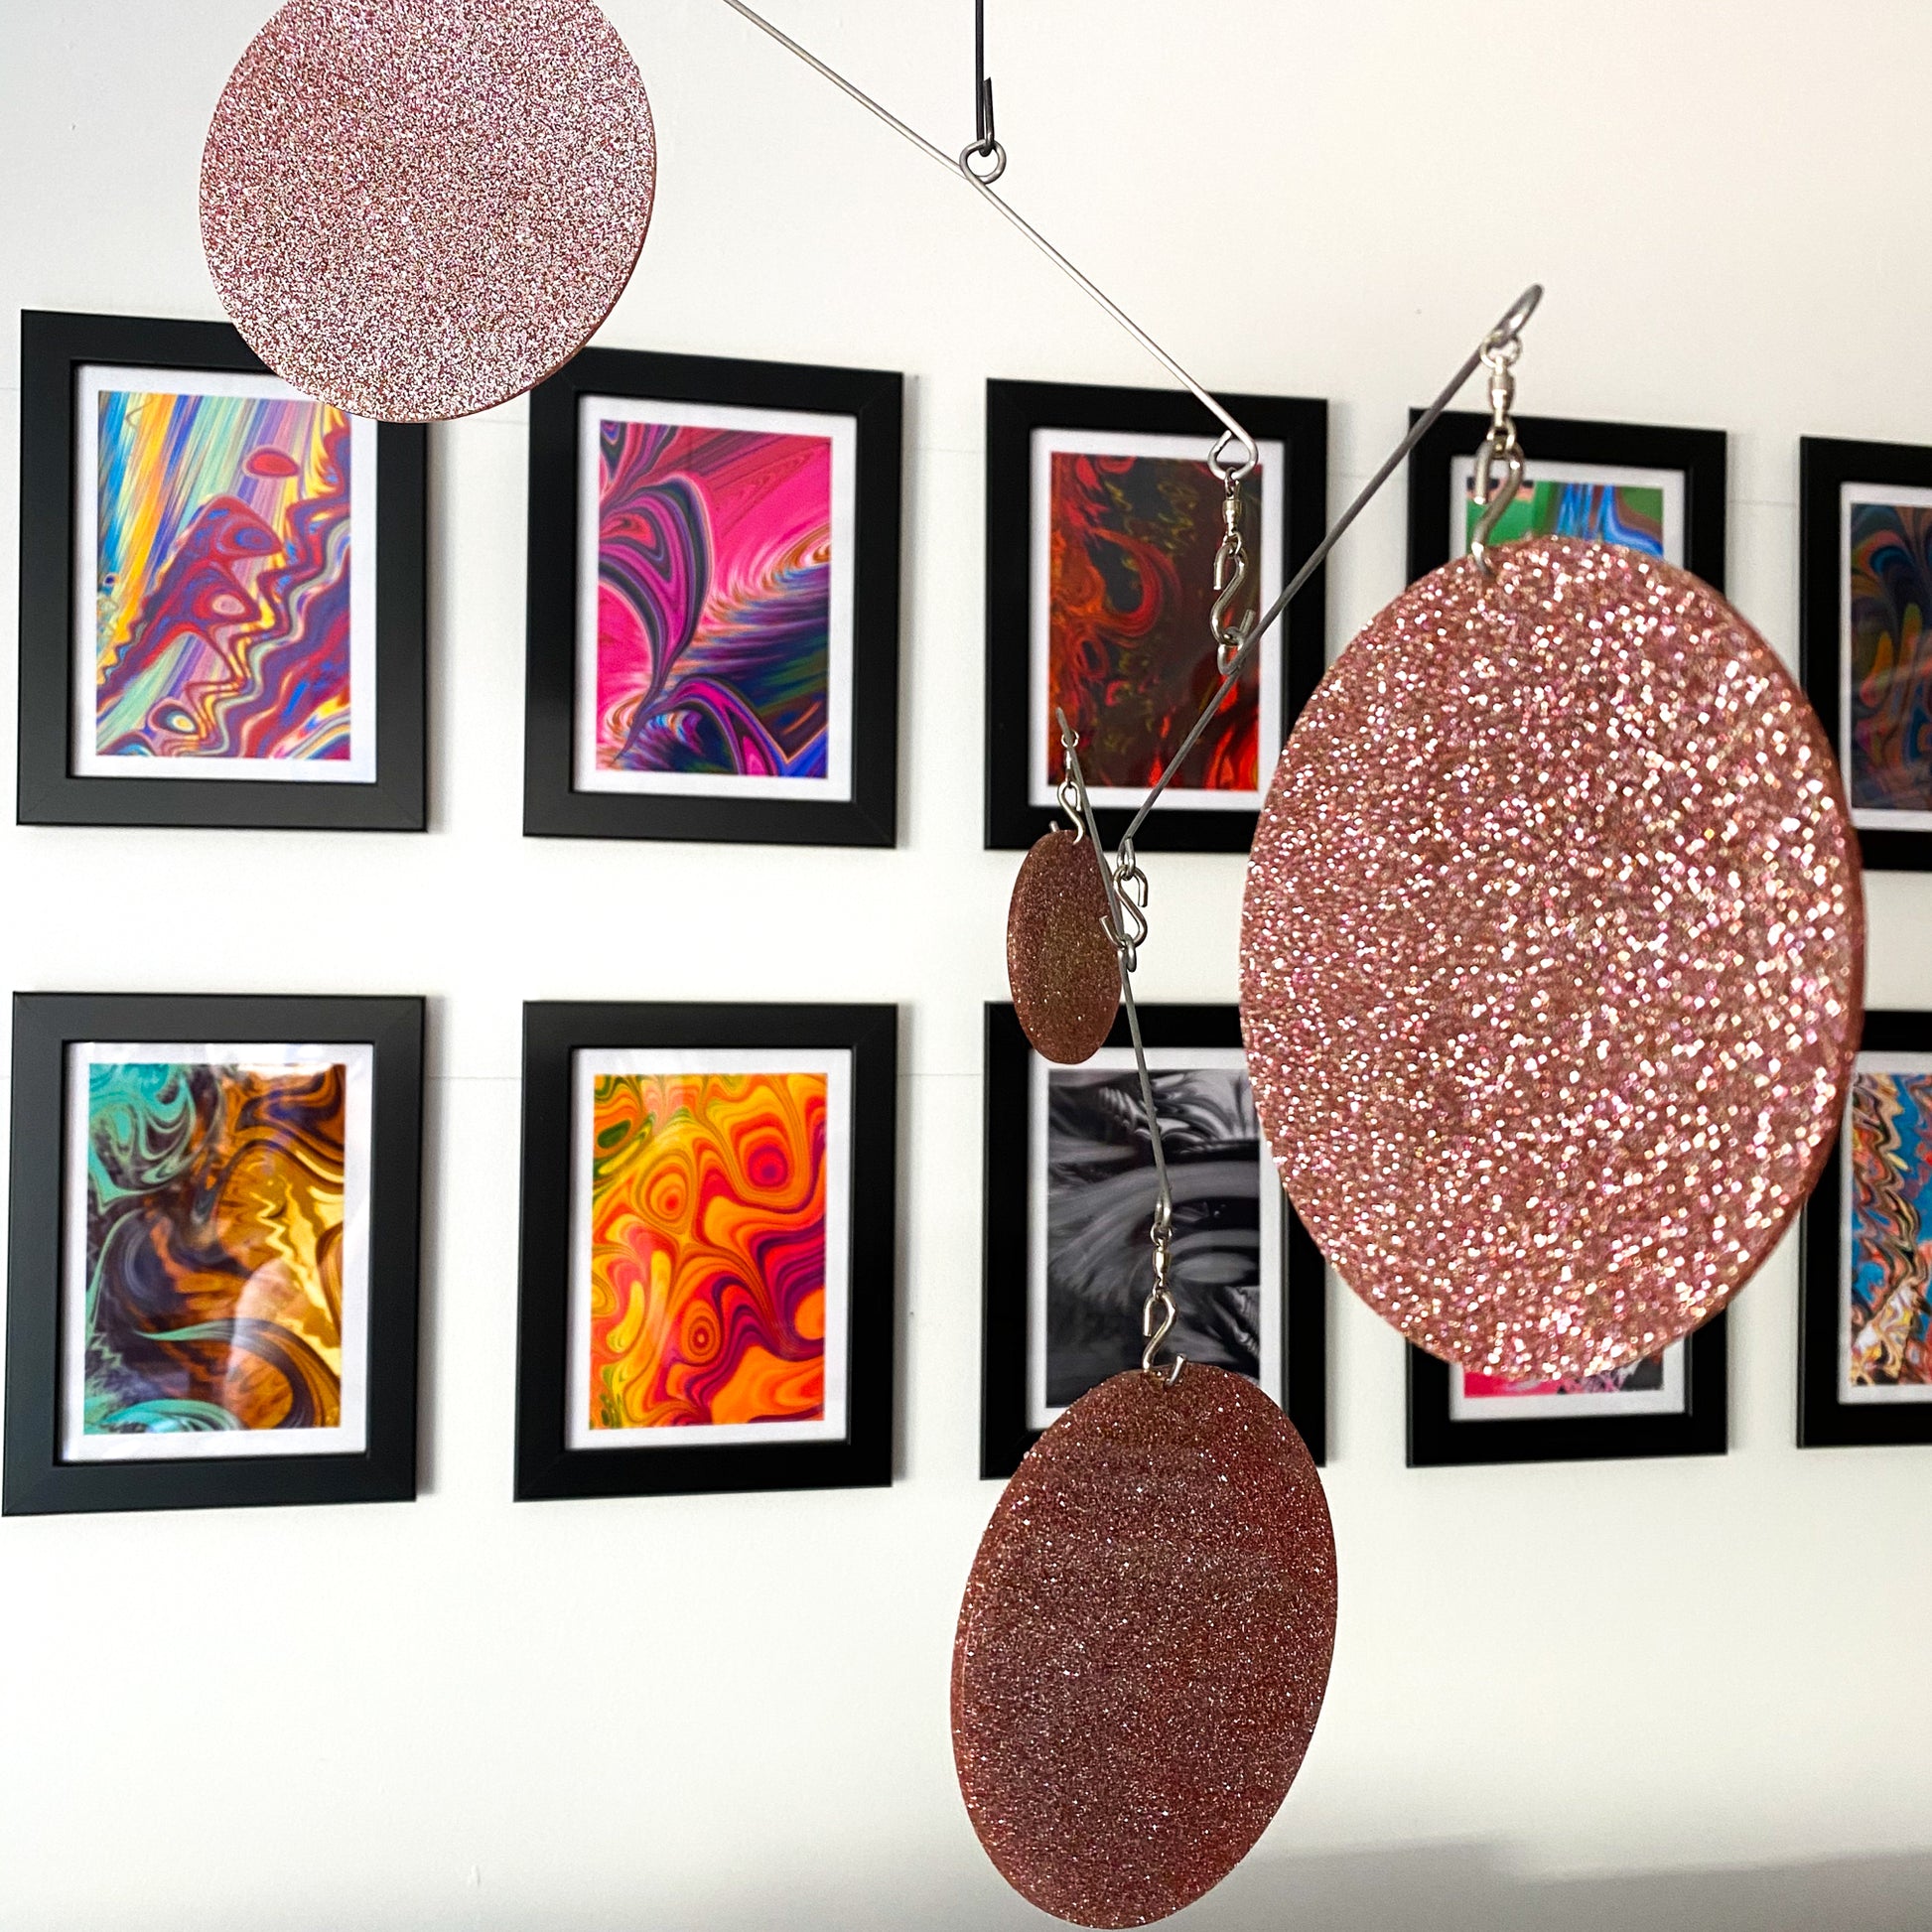 Gorgeous Rose Gold Atomic Mobile with abstract art in small picture frames -  DIY Kit - kinetic hanging art by AtomicMobiles.com